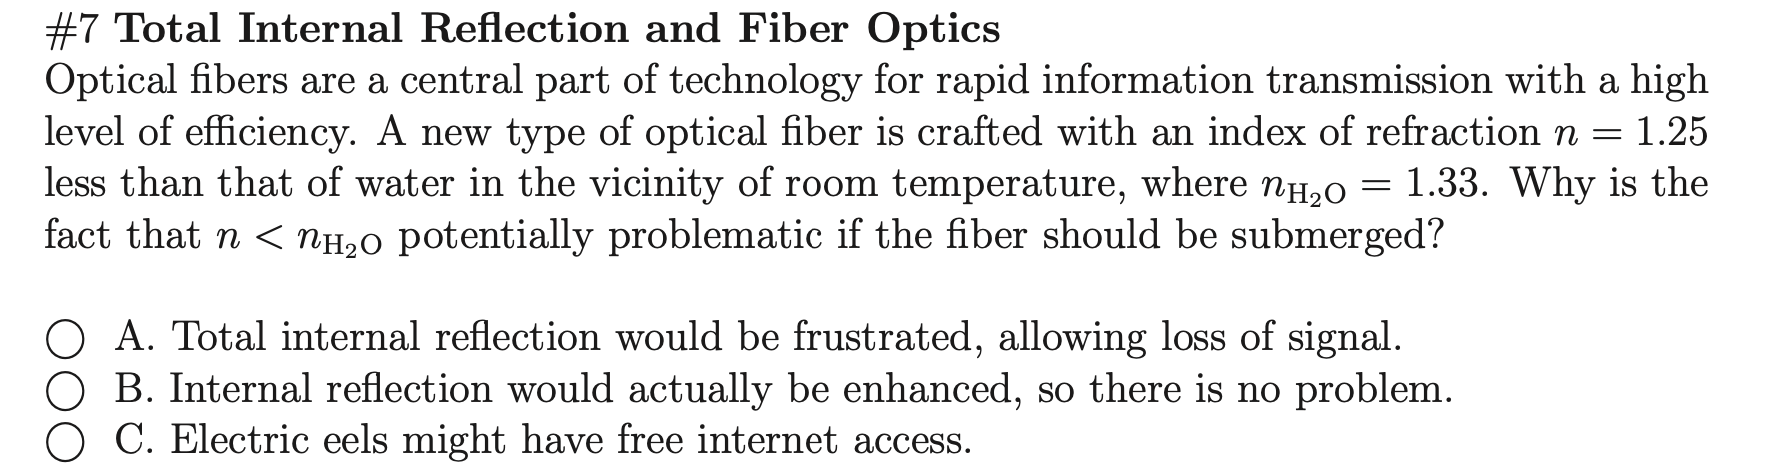 Optical fibers are a central part of technology for rapid information transmission with a high
level of efficiency. A new type of optical fiber is crafted with an index of refraction n =
less than that of water in the vicinity of room temperature, where NH2O
fact that n < nH20 potentially problematic if the fiber should be submerged?
1.25
= 1.33. Why is the
O A. Total internal reflection would be frustrated, allowing loss of signal.
O B. Internal reflection would actually be enhanced, so there is no problem.
C. Electric eels might have free internet access.
